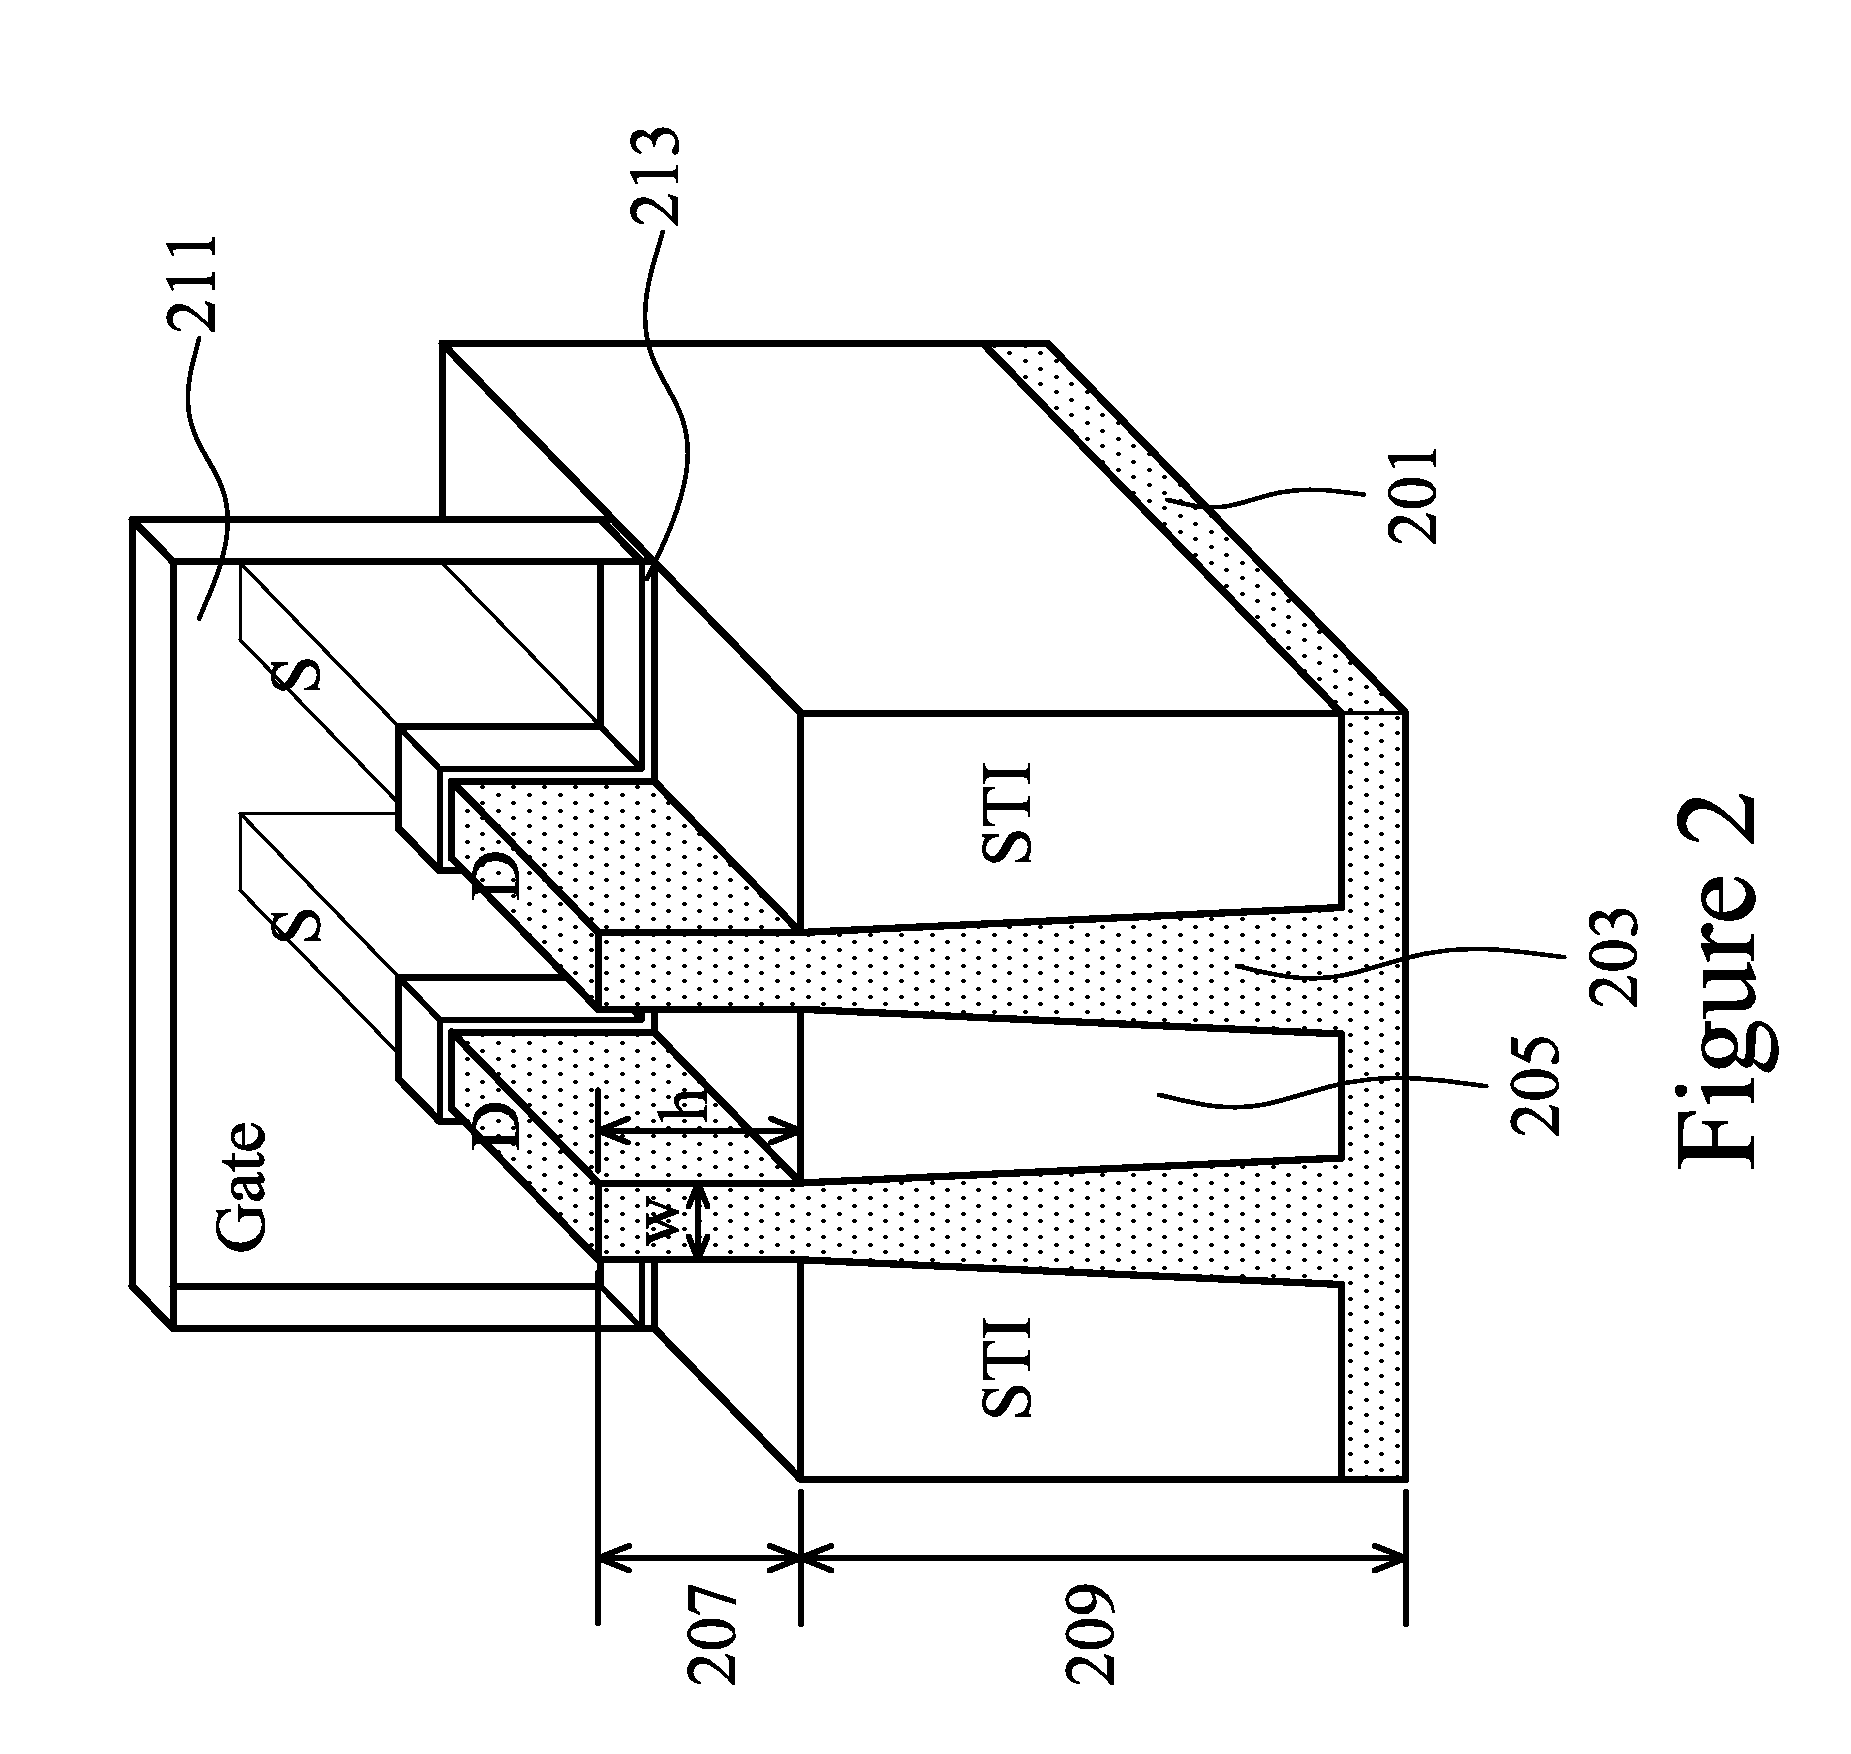 Cell Layout for SRAM FinFET Transistors